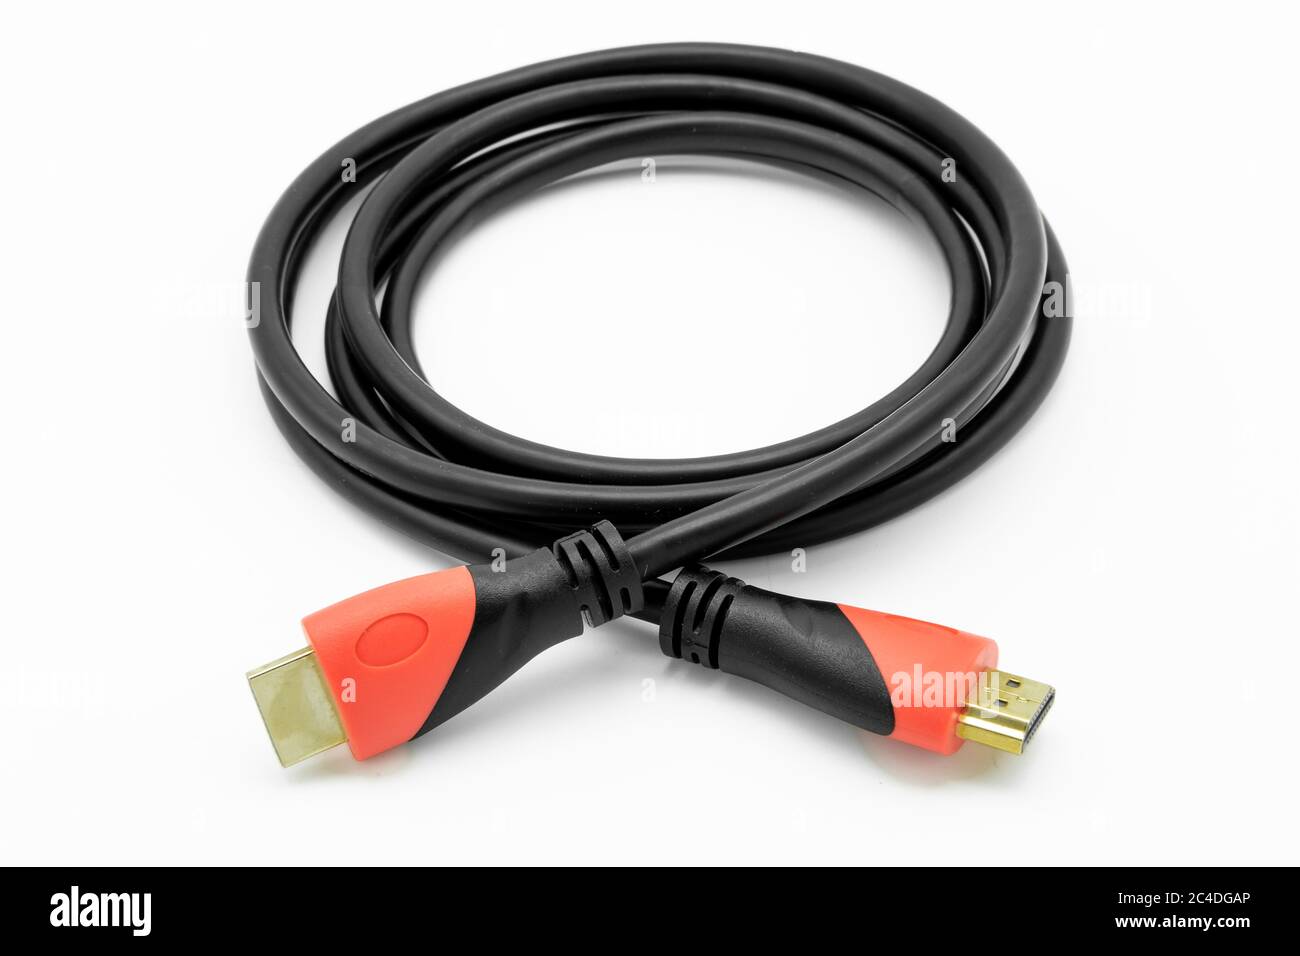 HDMI to HDMI A/V connection cable. Showing the gold HDMI connectors and thick connector plug boot assembly. Used for UHD TVs Stock Photo